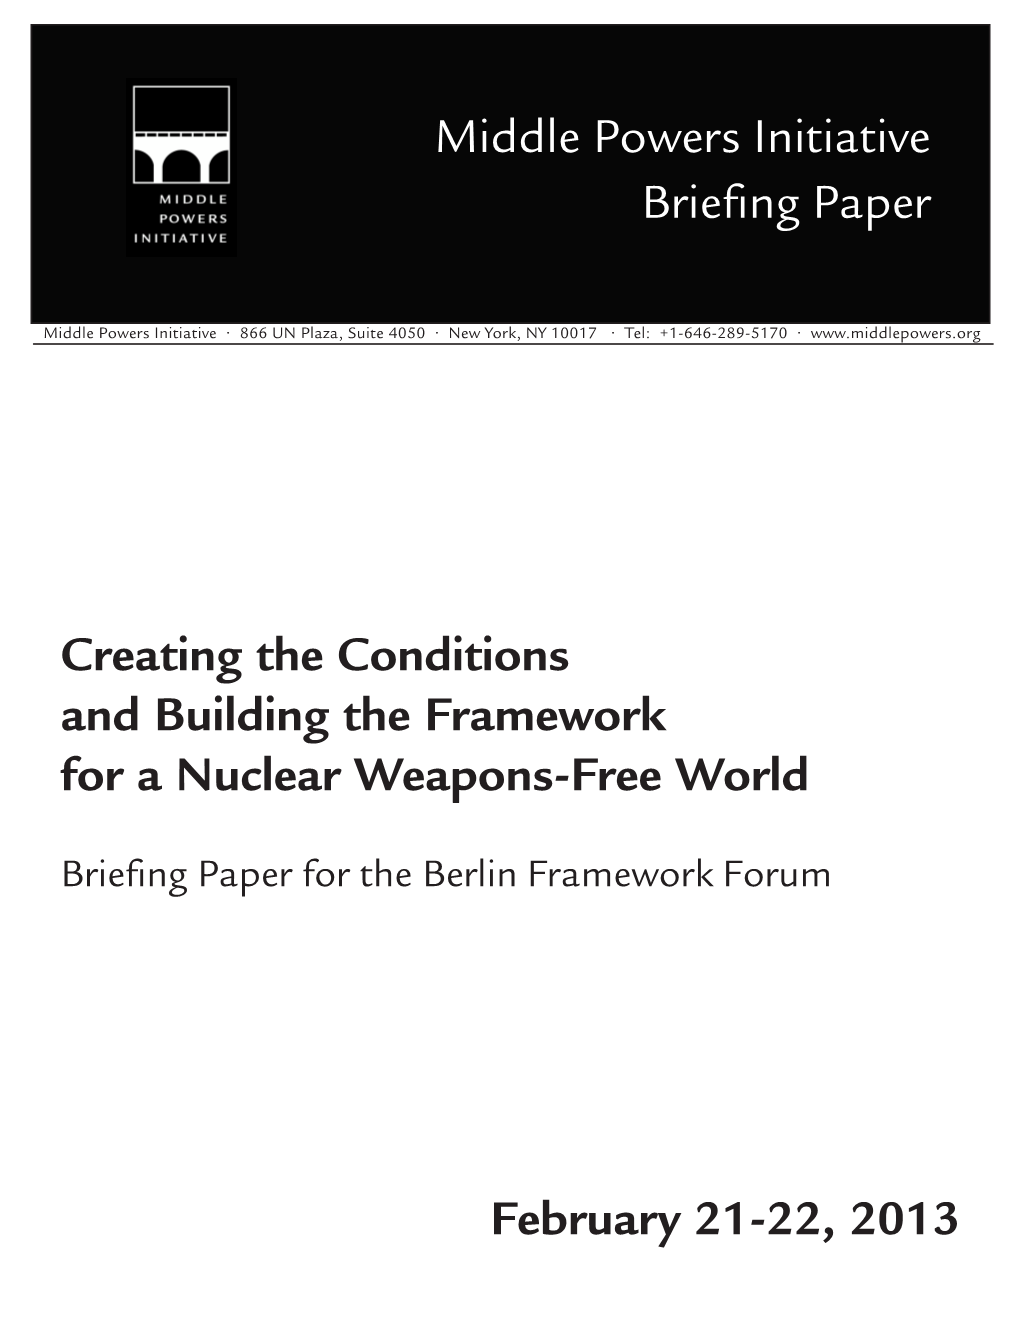 Middle Powers Initiative Briefing Paper Creating the Conditions and Building the Framework for a Nuclear Weapons-Free World Fe